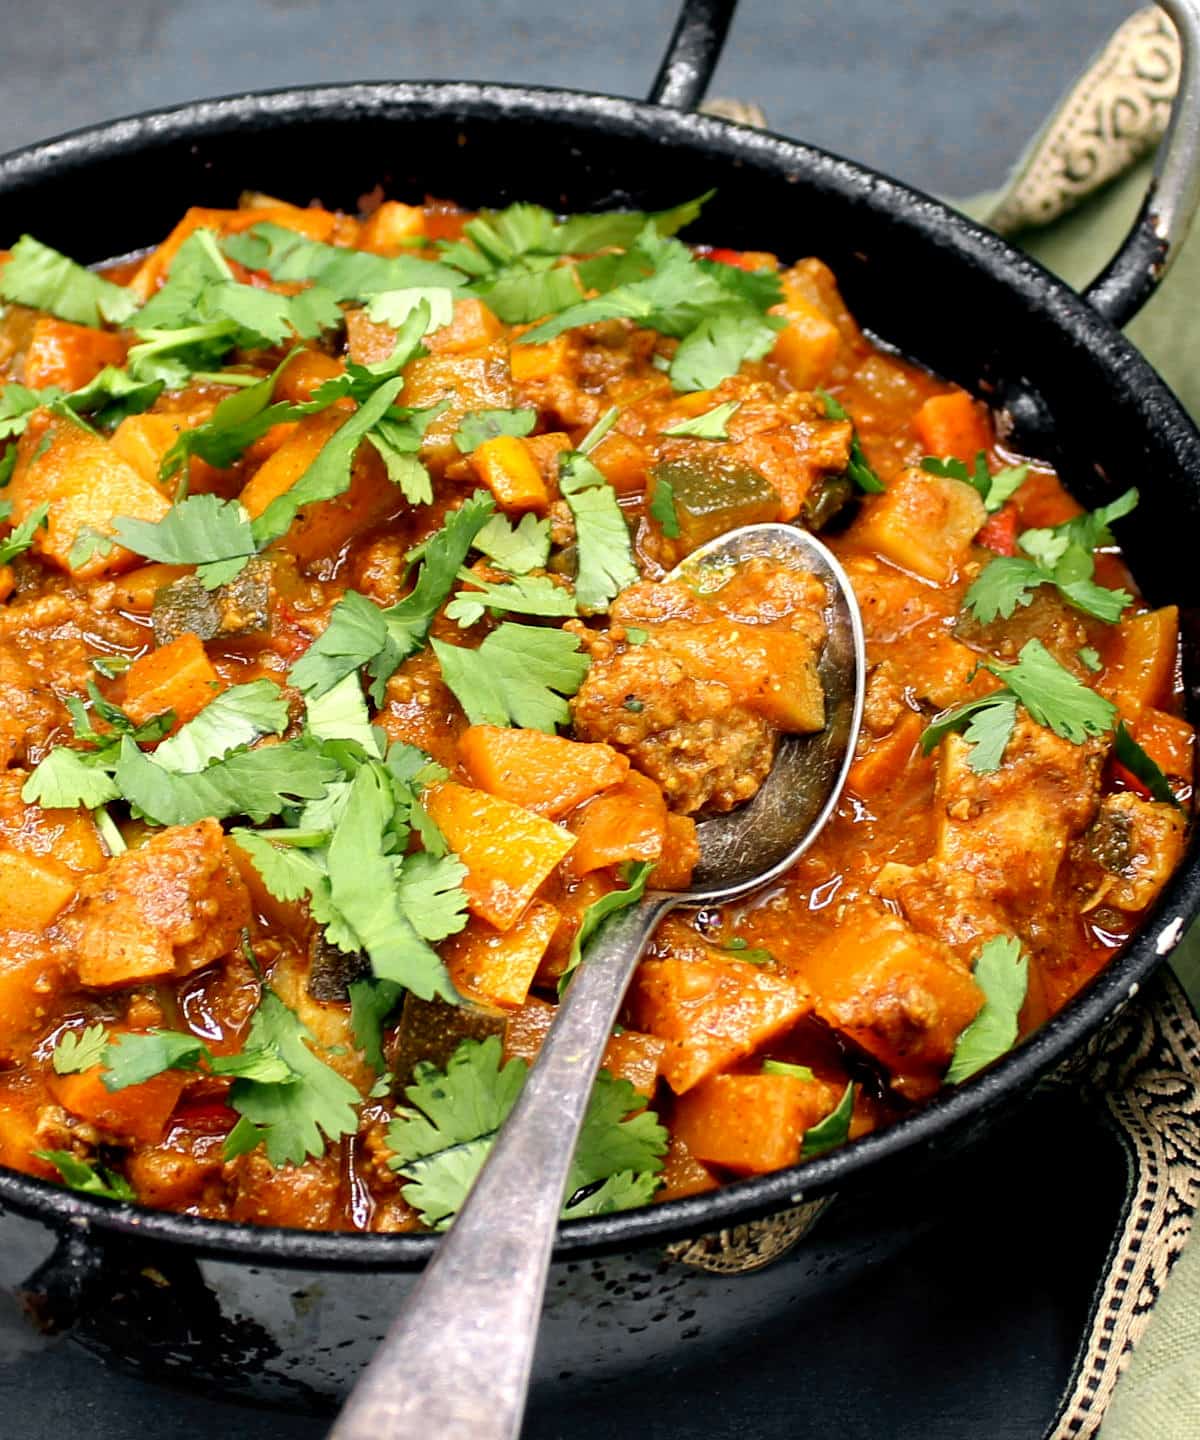 Curry with mince and veggies in karahi with a spoon.